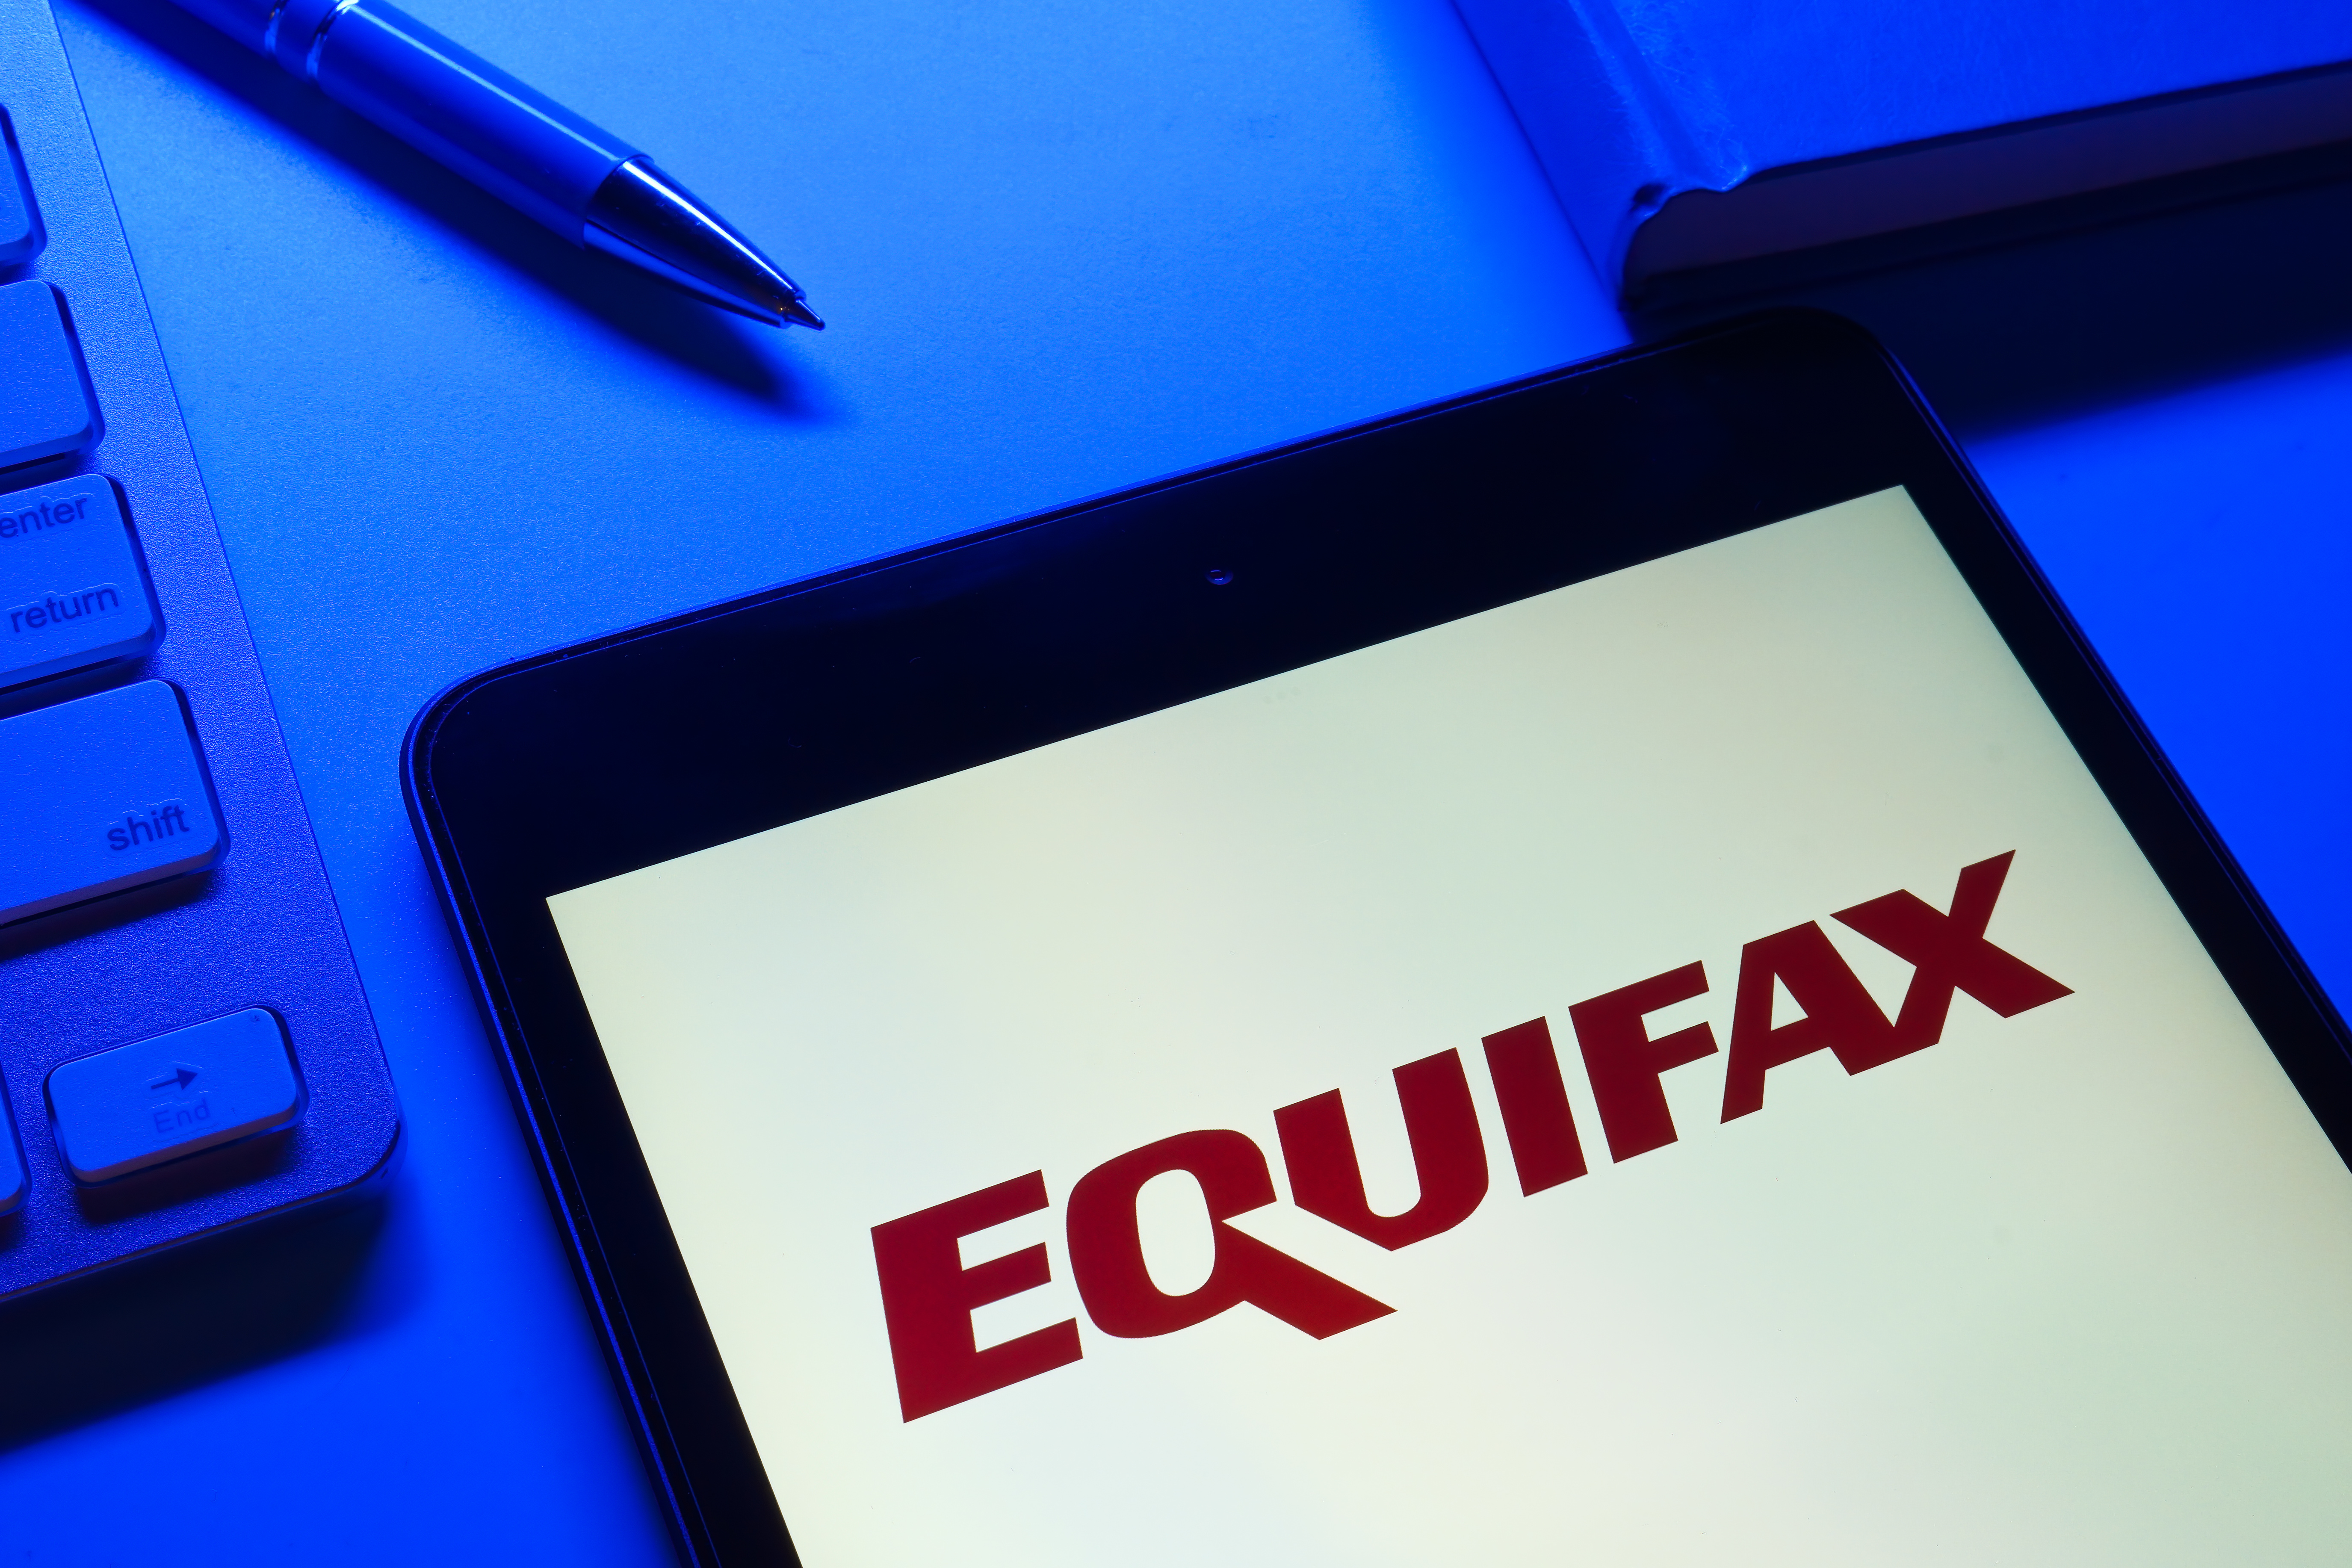 Check how to start using Equifax services to track your credit score. Source: Adobe Stock.